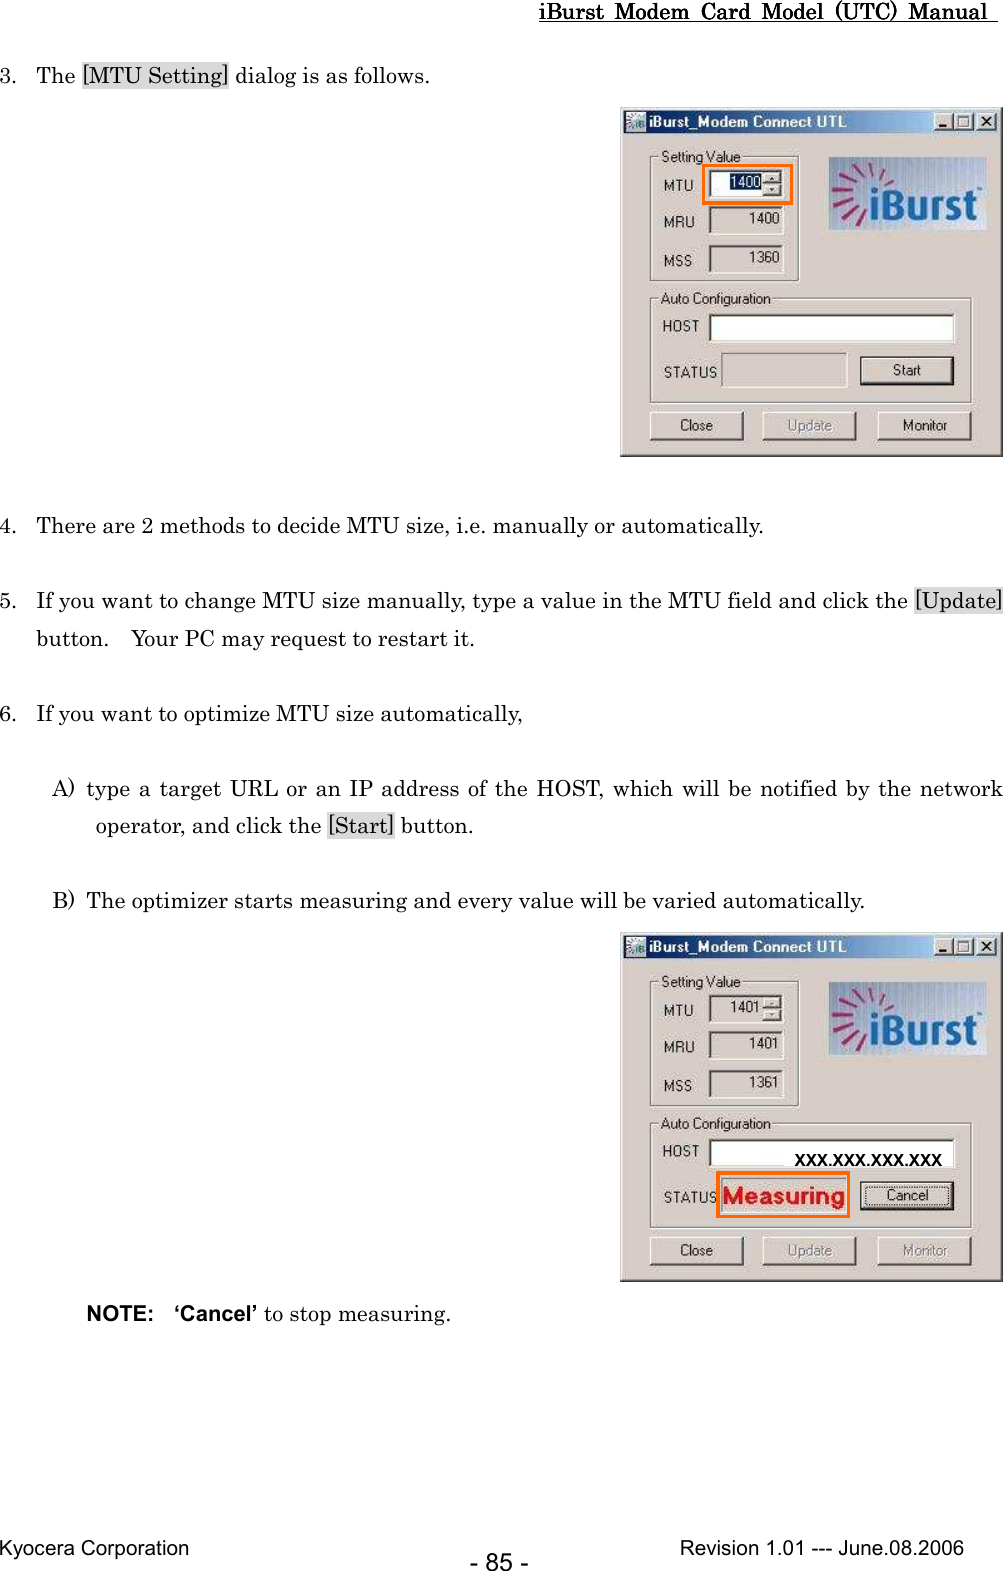 iBurst  Modem  Card  Model  (UTC)  Manual iBurst  Modem  Card  Model  (UTC)  Manual iBurst  Modem  Card  Model  (UTC)  Manual iBurst  Modem  Card  Model  (UTC)  Manual       Kyocera Corporation                                                                                              Revision 1.01 --- June.08.2006 - 85 - 3. The [MTU Setting] dialog is as follows.   4. There are 2 methods to decide MTU size, i.e. manually or automatically.  5. If you want to change MTU size manually, type a value in the MTU field and click the [Update] button.    Your PC may request to restart it.  6. If you want to optimize MTU size automatically,  A) type a target URL or an IP address of the HOST, which will be notified by the network operator, and click the [Start] button.  B) The optimizer starts measuring and every value will be varied automatically.  NOTE:  ‘Cancel’ to stop measuring.  XXX.XXX.XXX.XXX 